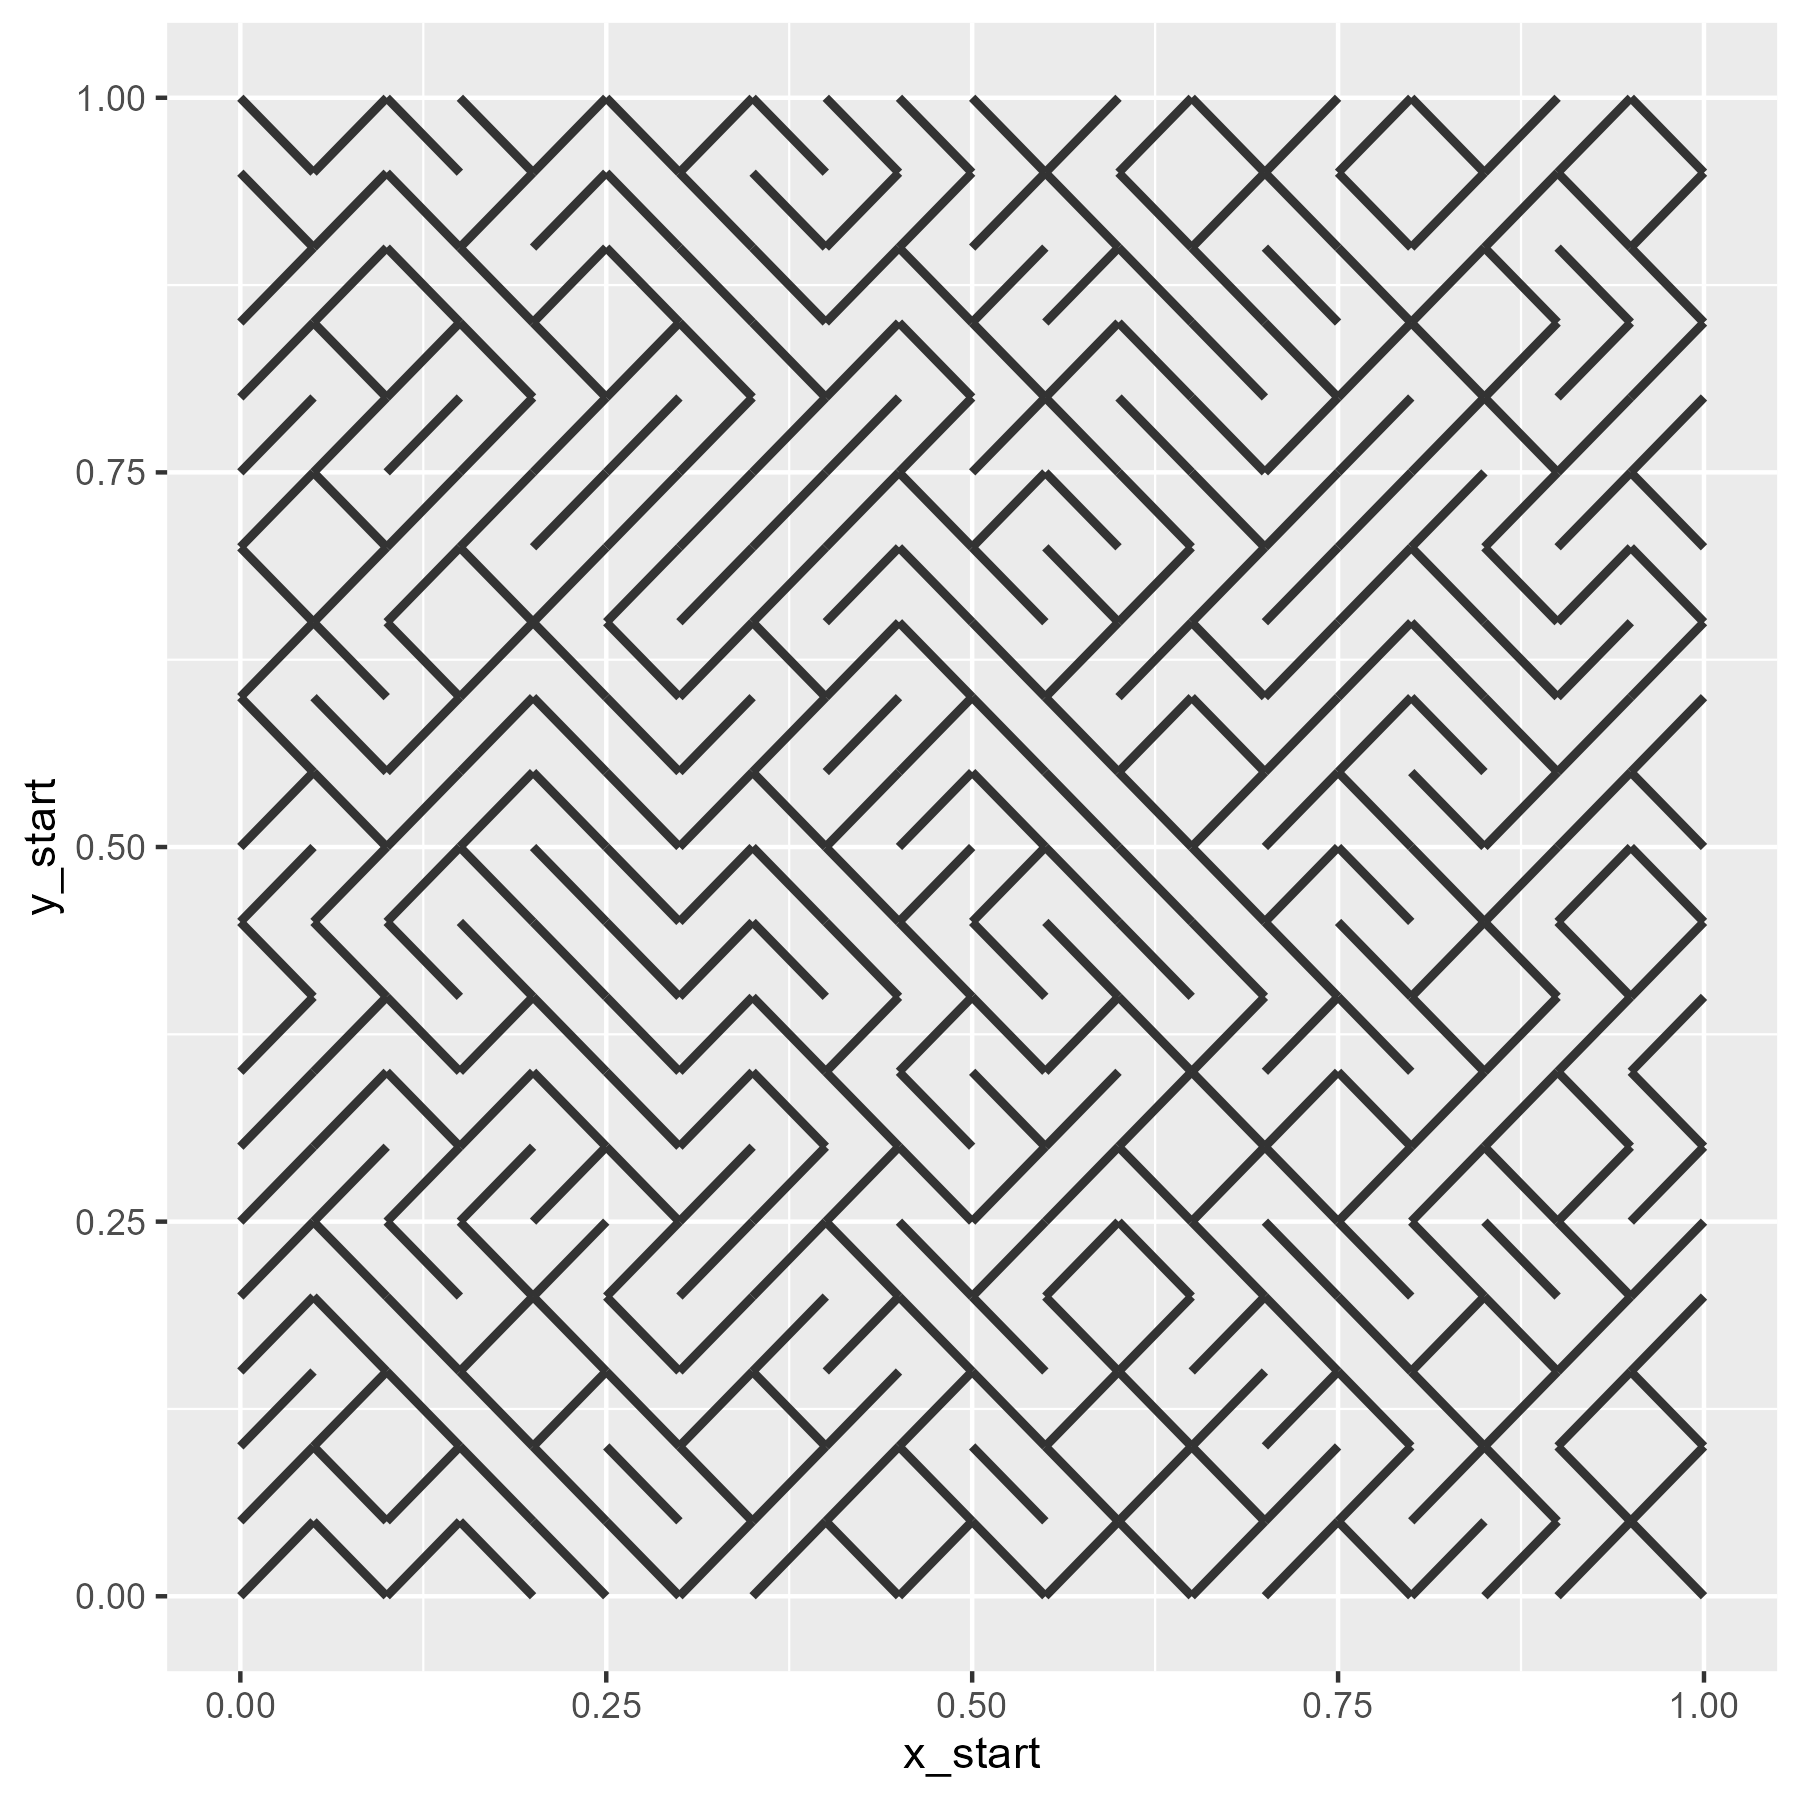 A maze with 50% flipping probability